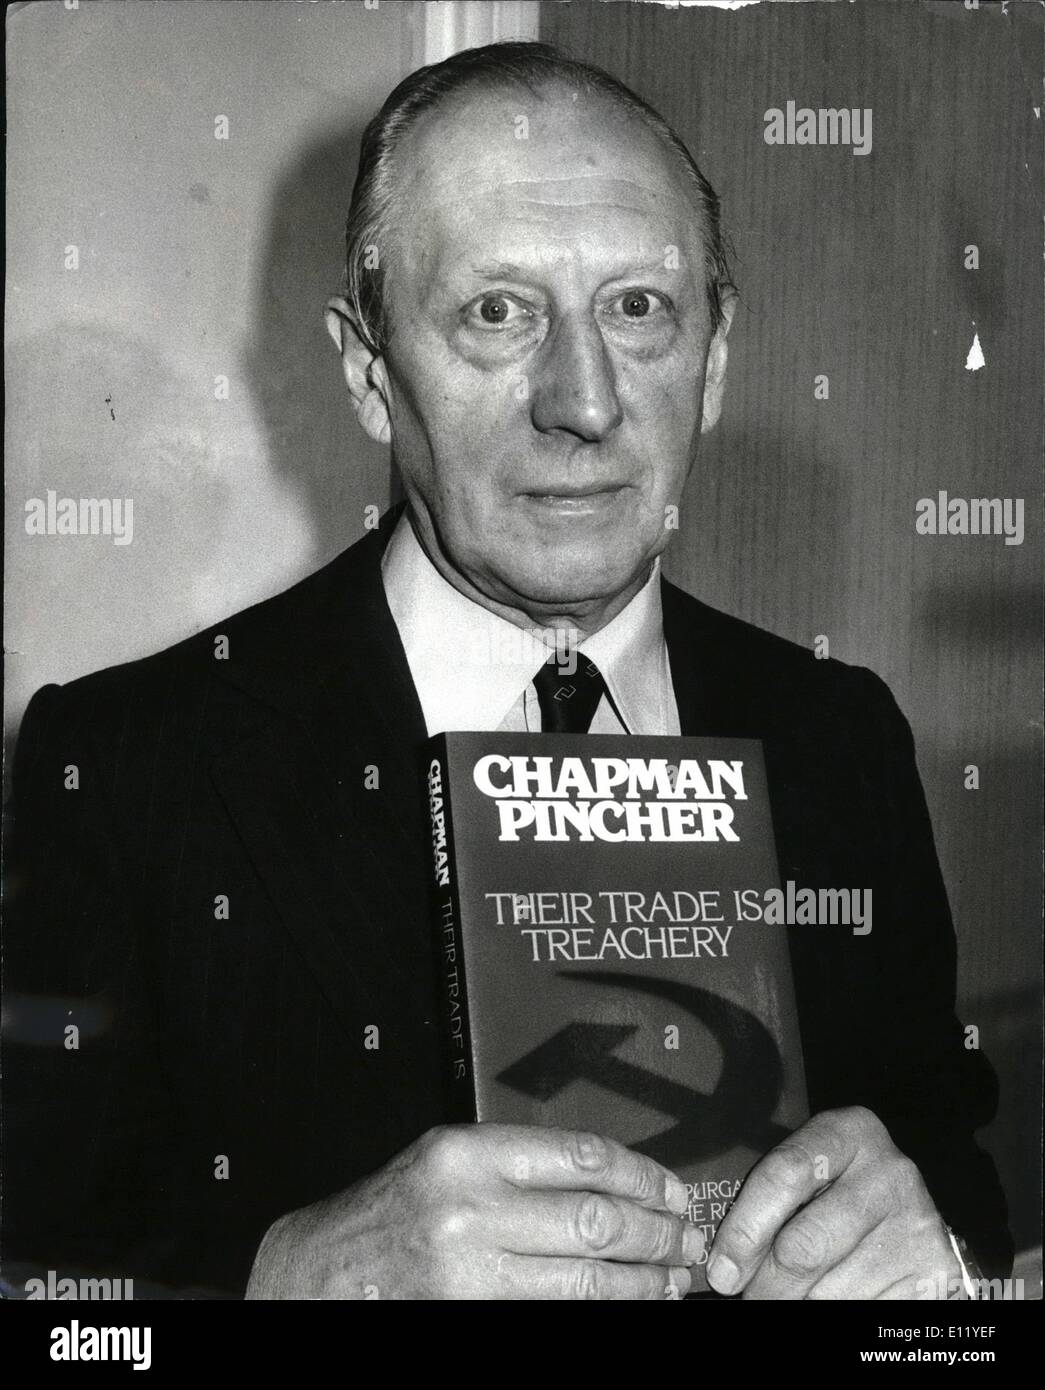 Mar. 27, 1981 - March 27th 1981 Chapman Pincher facts distorted says ex-MI5 Chief. Sir Martin Furnival Jones, who succeeded Sir Roger Hollis as head of MI5, yesterday agreed with Mr. Thatcher's Commons statement when she said that two investigations had come to the conclusion that Sir Roger Hollis, director general of MI5 from 1956 to 1965 had not spied for the Russians. But Chapman Pincher, who launched his book Their Trade is Treachery in London last night, still stand by his claim that Sir Roger Hollis had been working for Soviet intelligence during his 30 years service Stock Photo